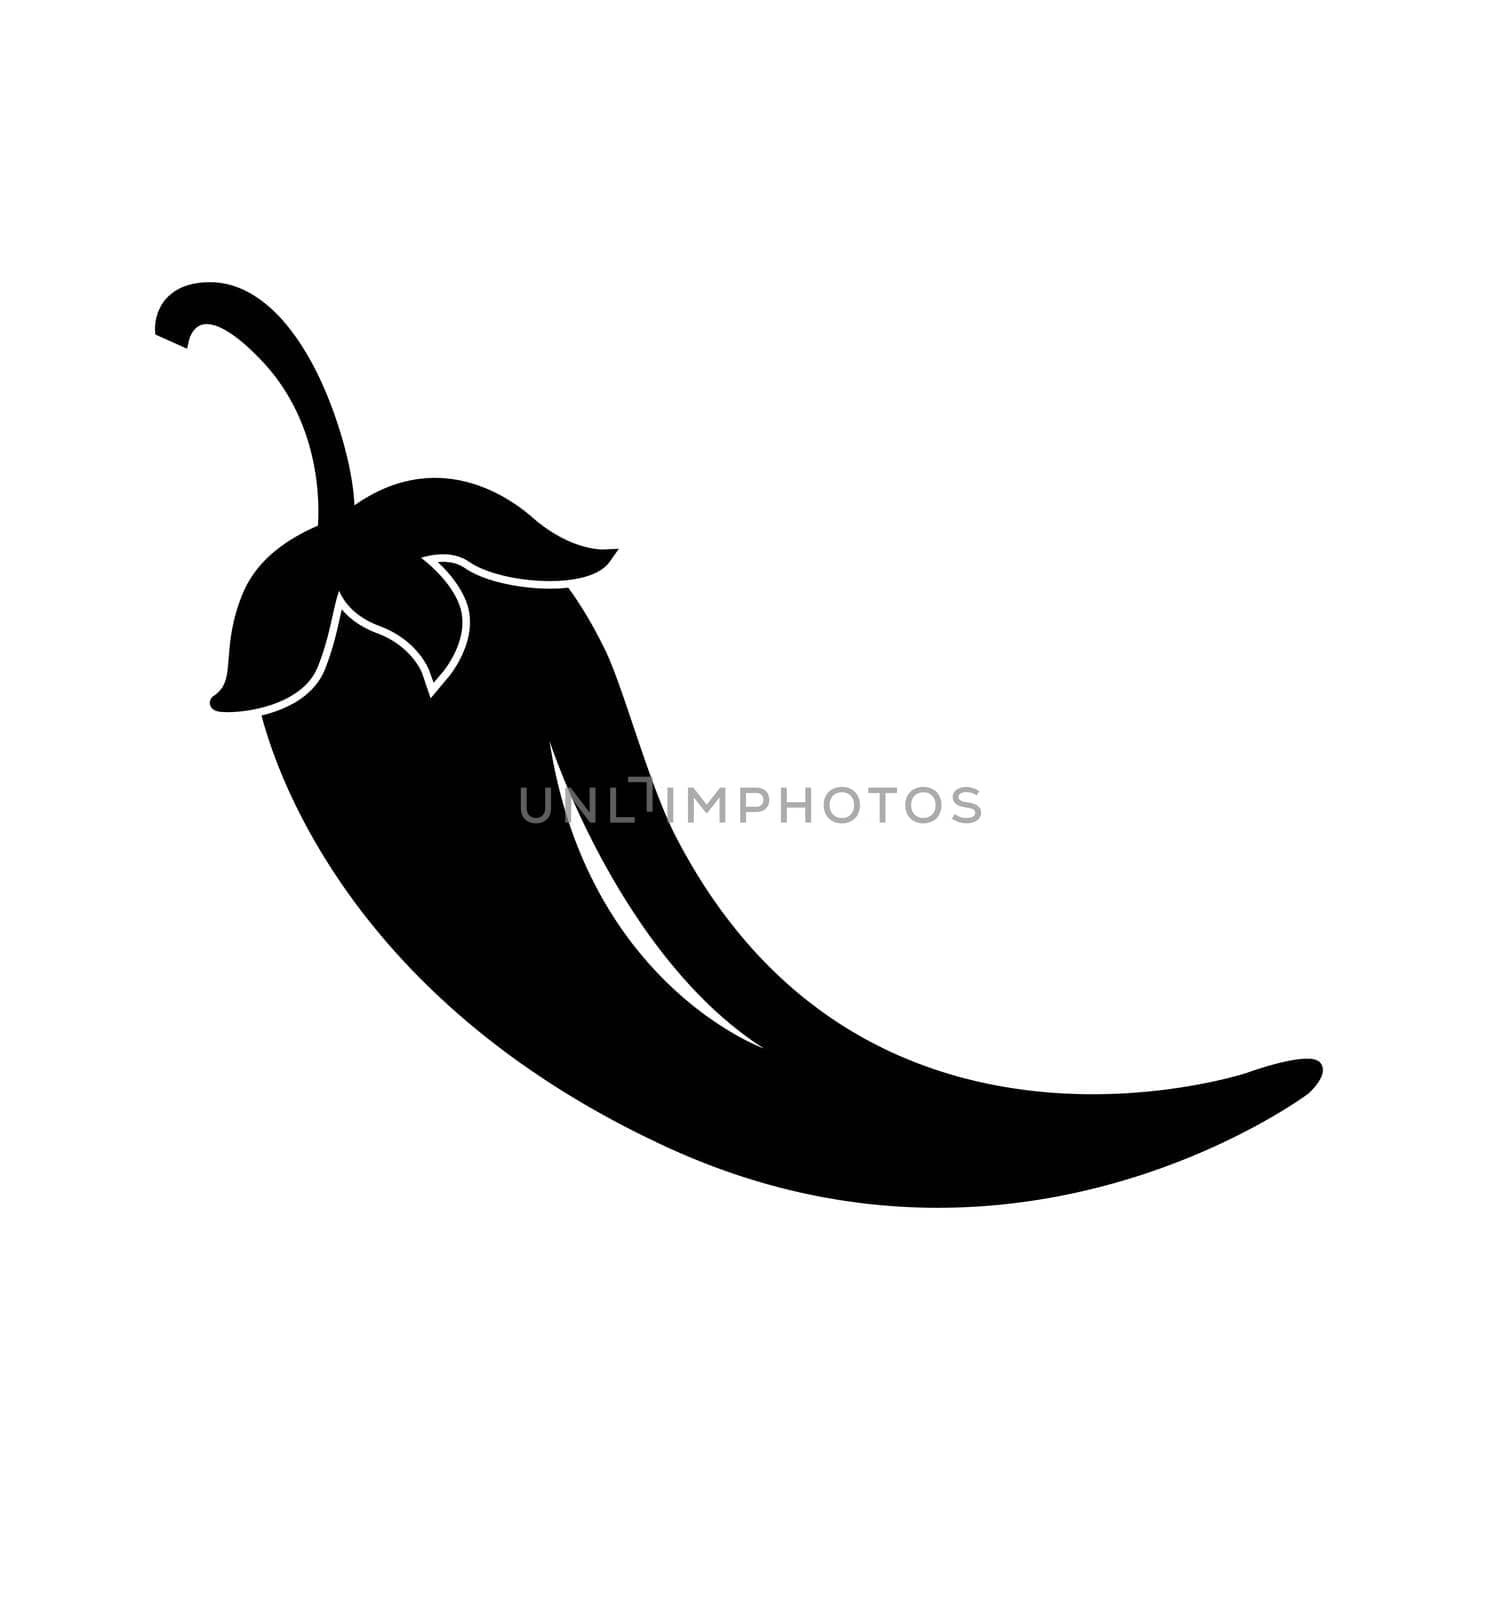 Mexican chili pepper black flat icon vector isolated on white background jalapeno